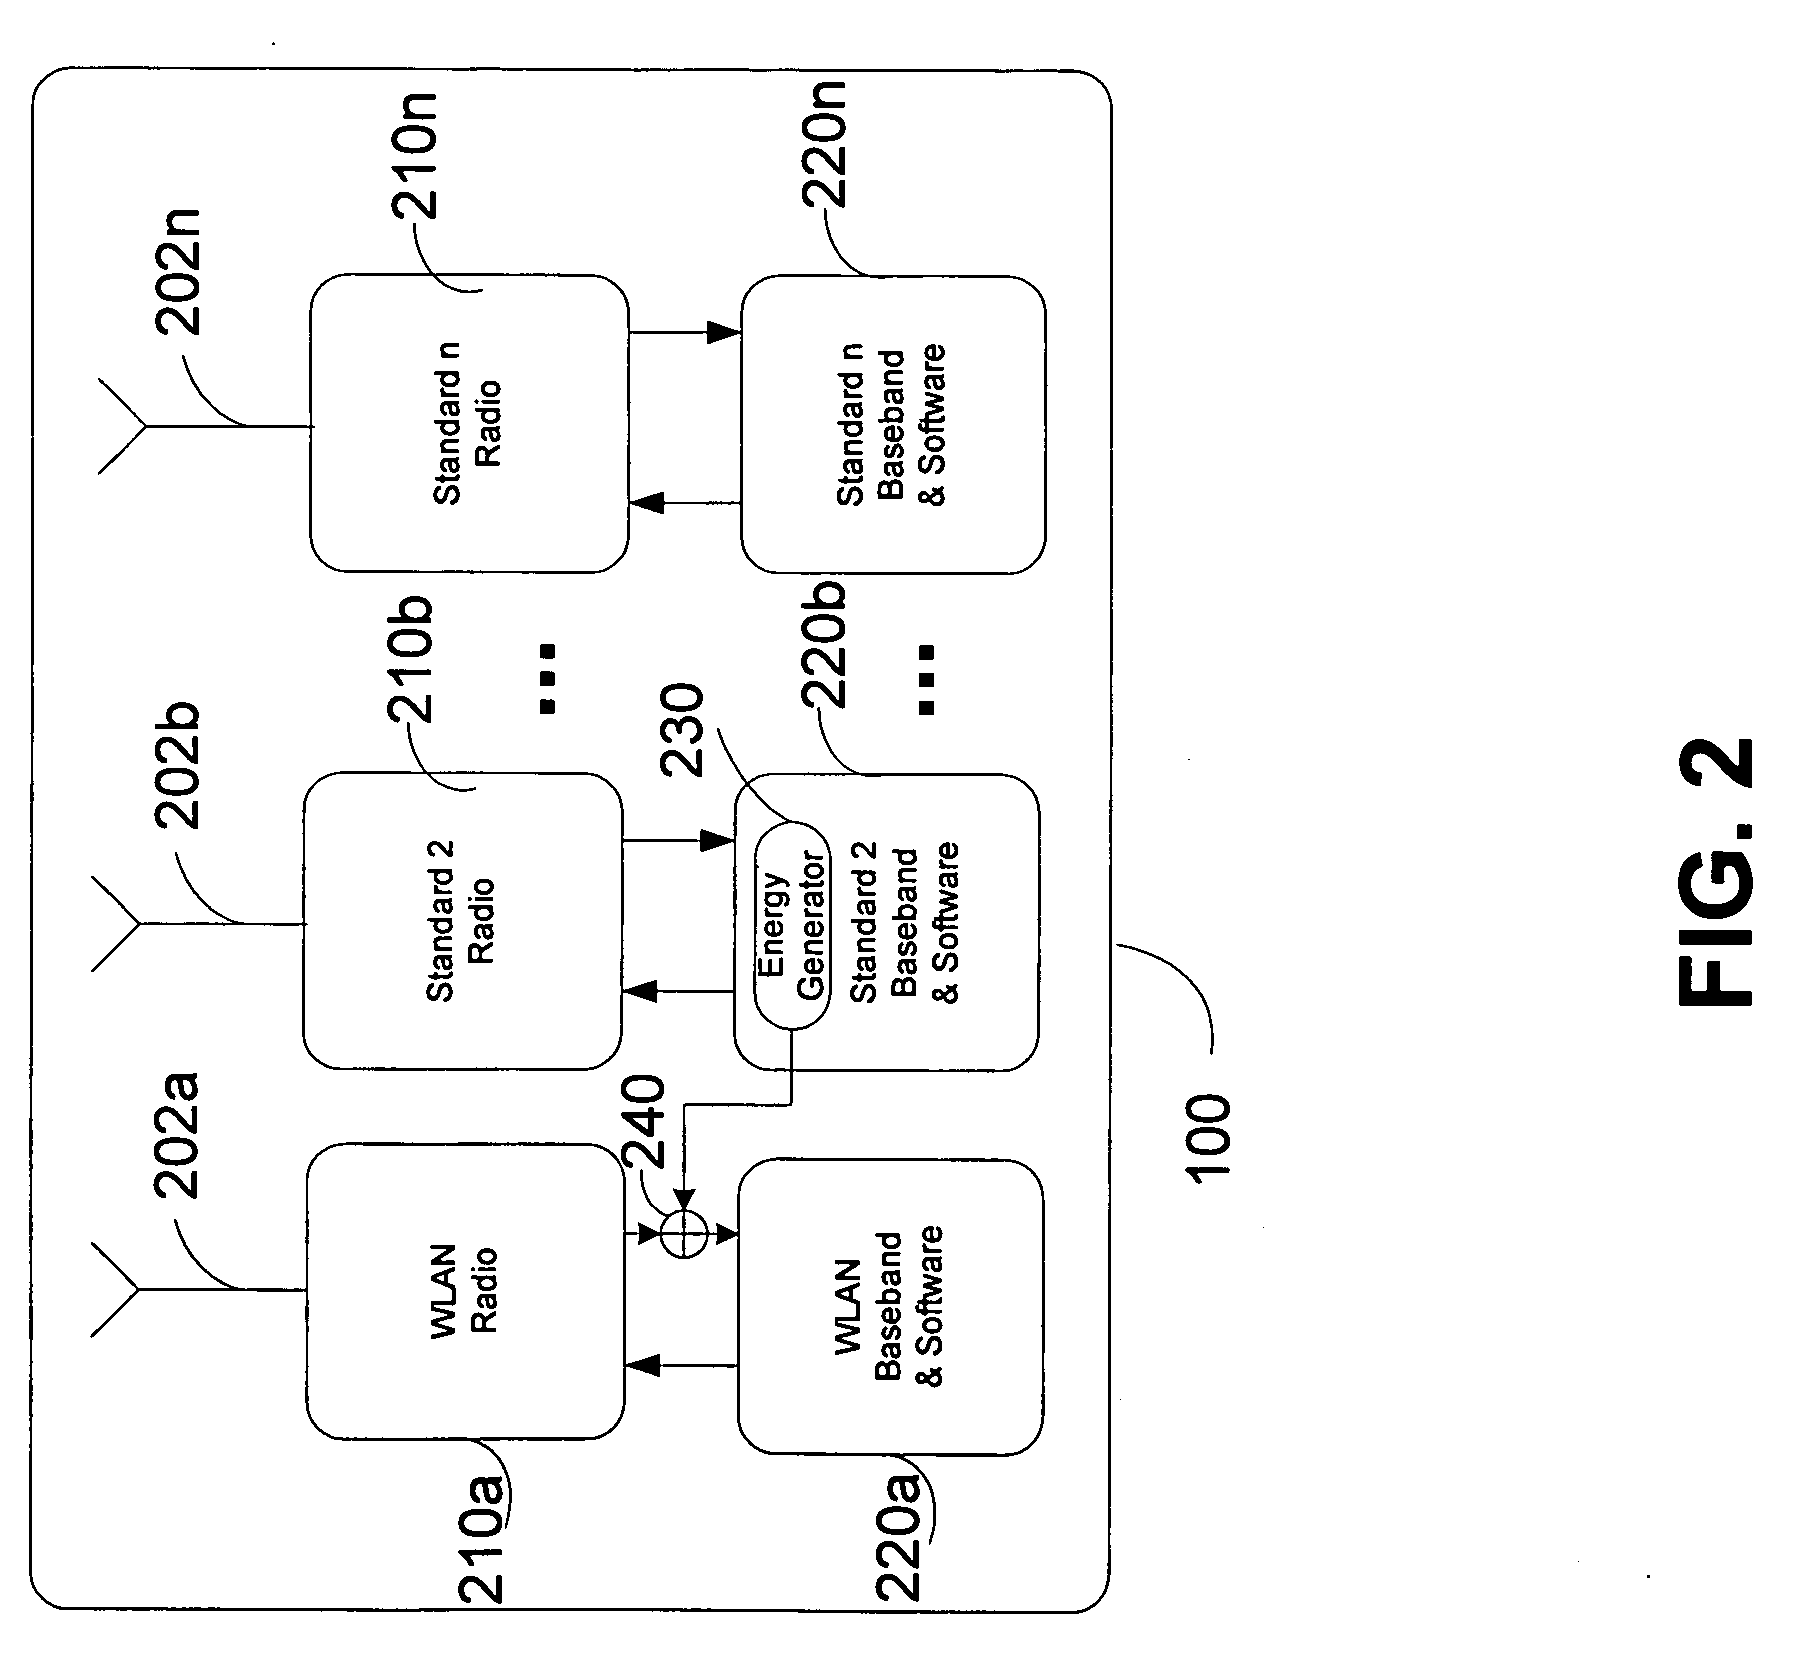 Method and apparatus for synchronizing WLAN in a multi-mode radio system